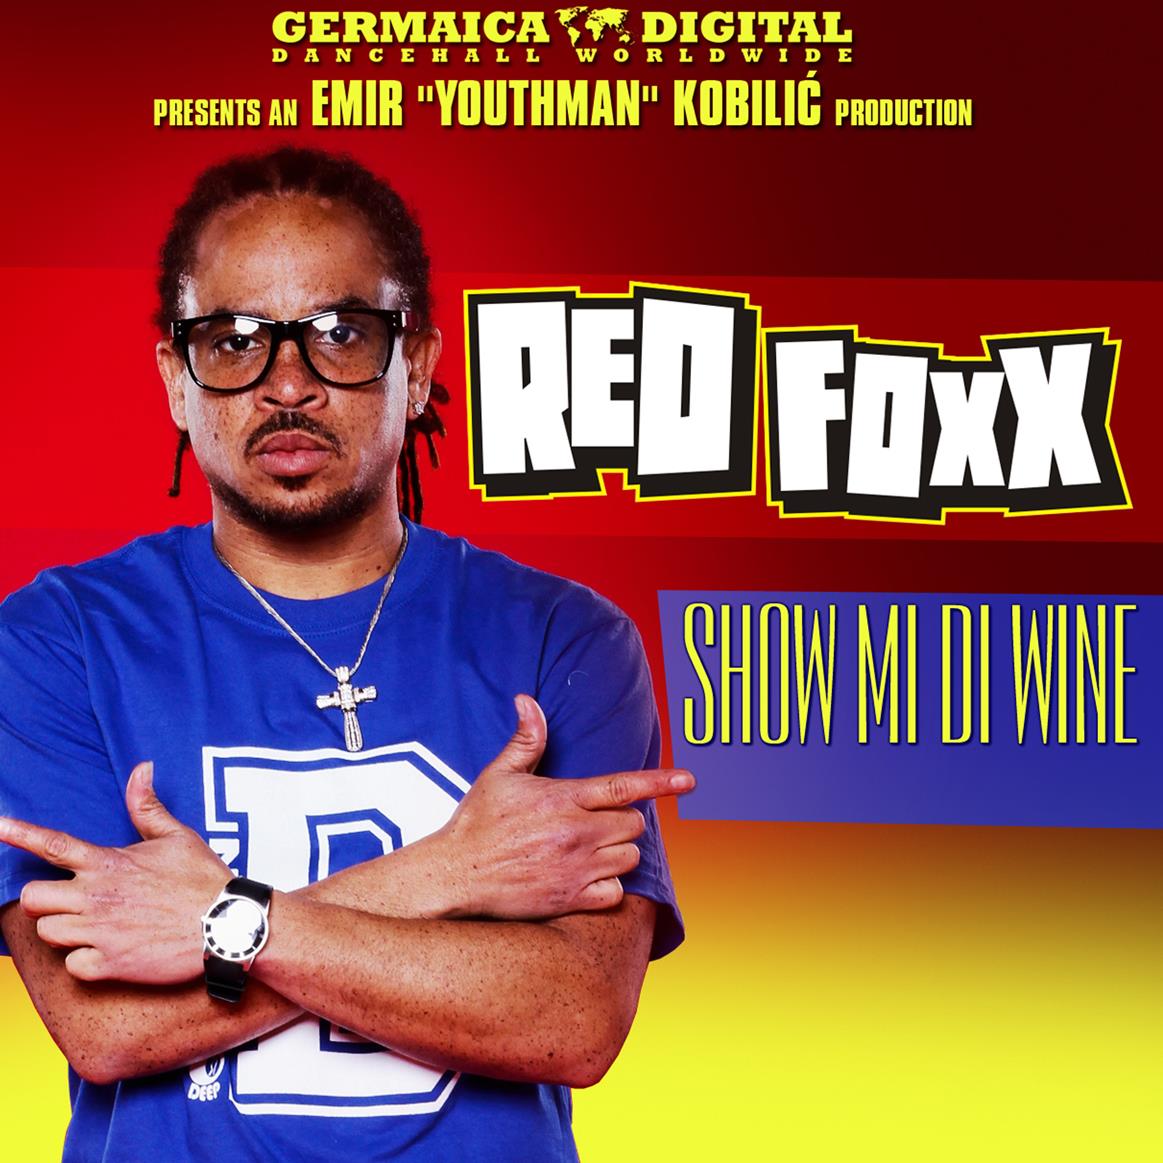 Red Fox - Show Mi Di Whine - Clean - Download